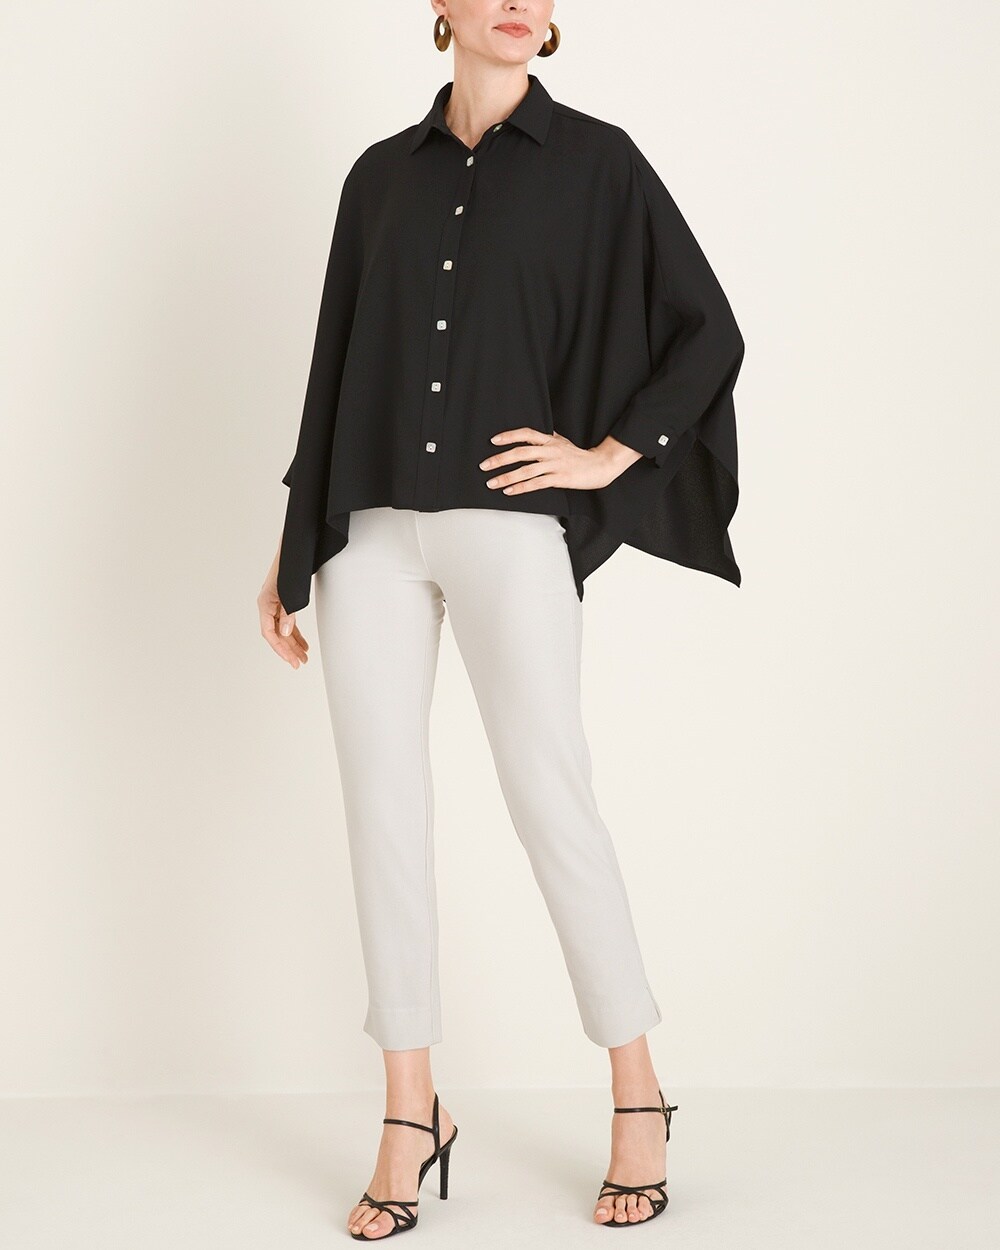 Marla Wynne for Chico's Crepe Dolman-Sleeve Shirt - Chico's